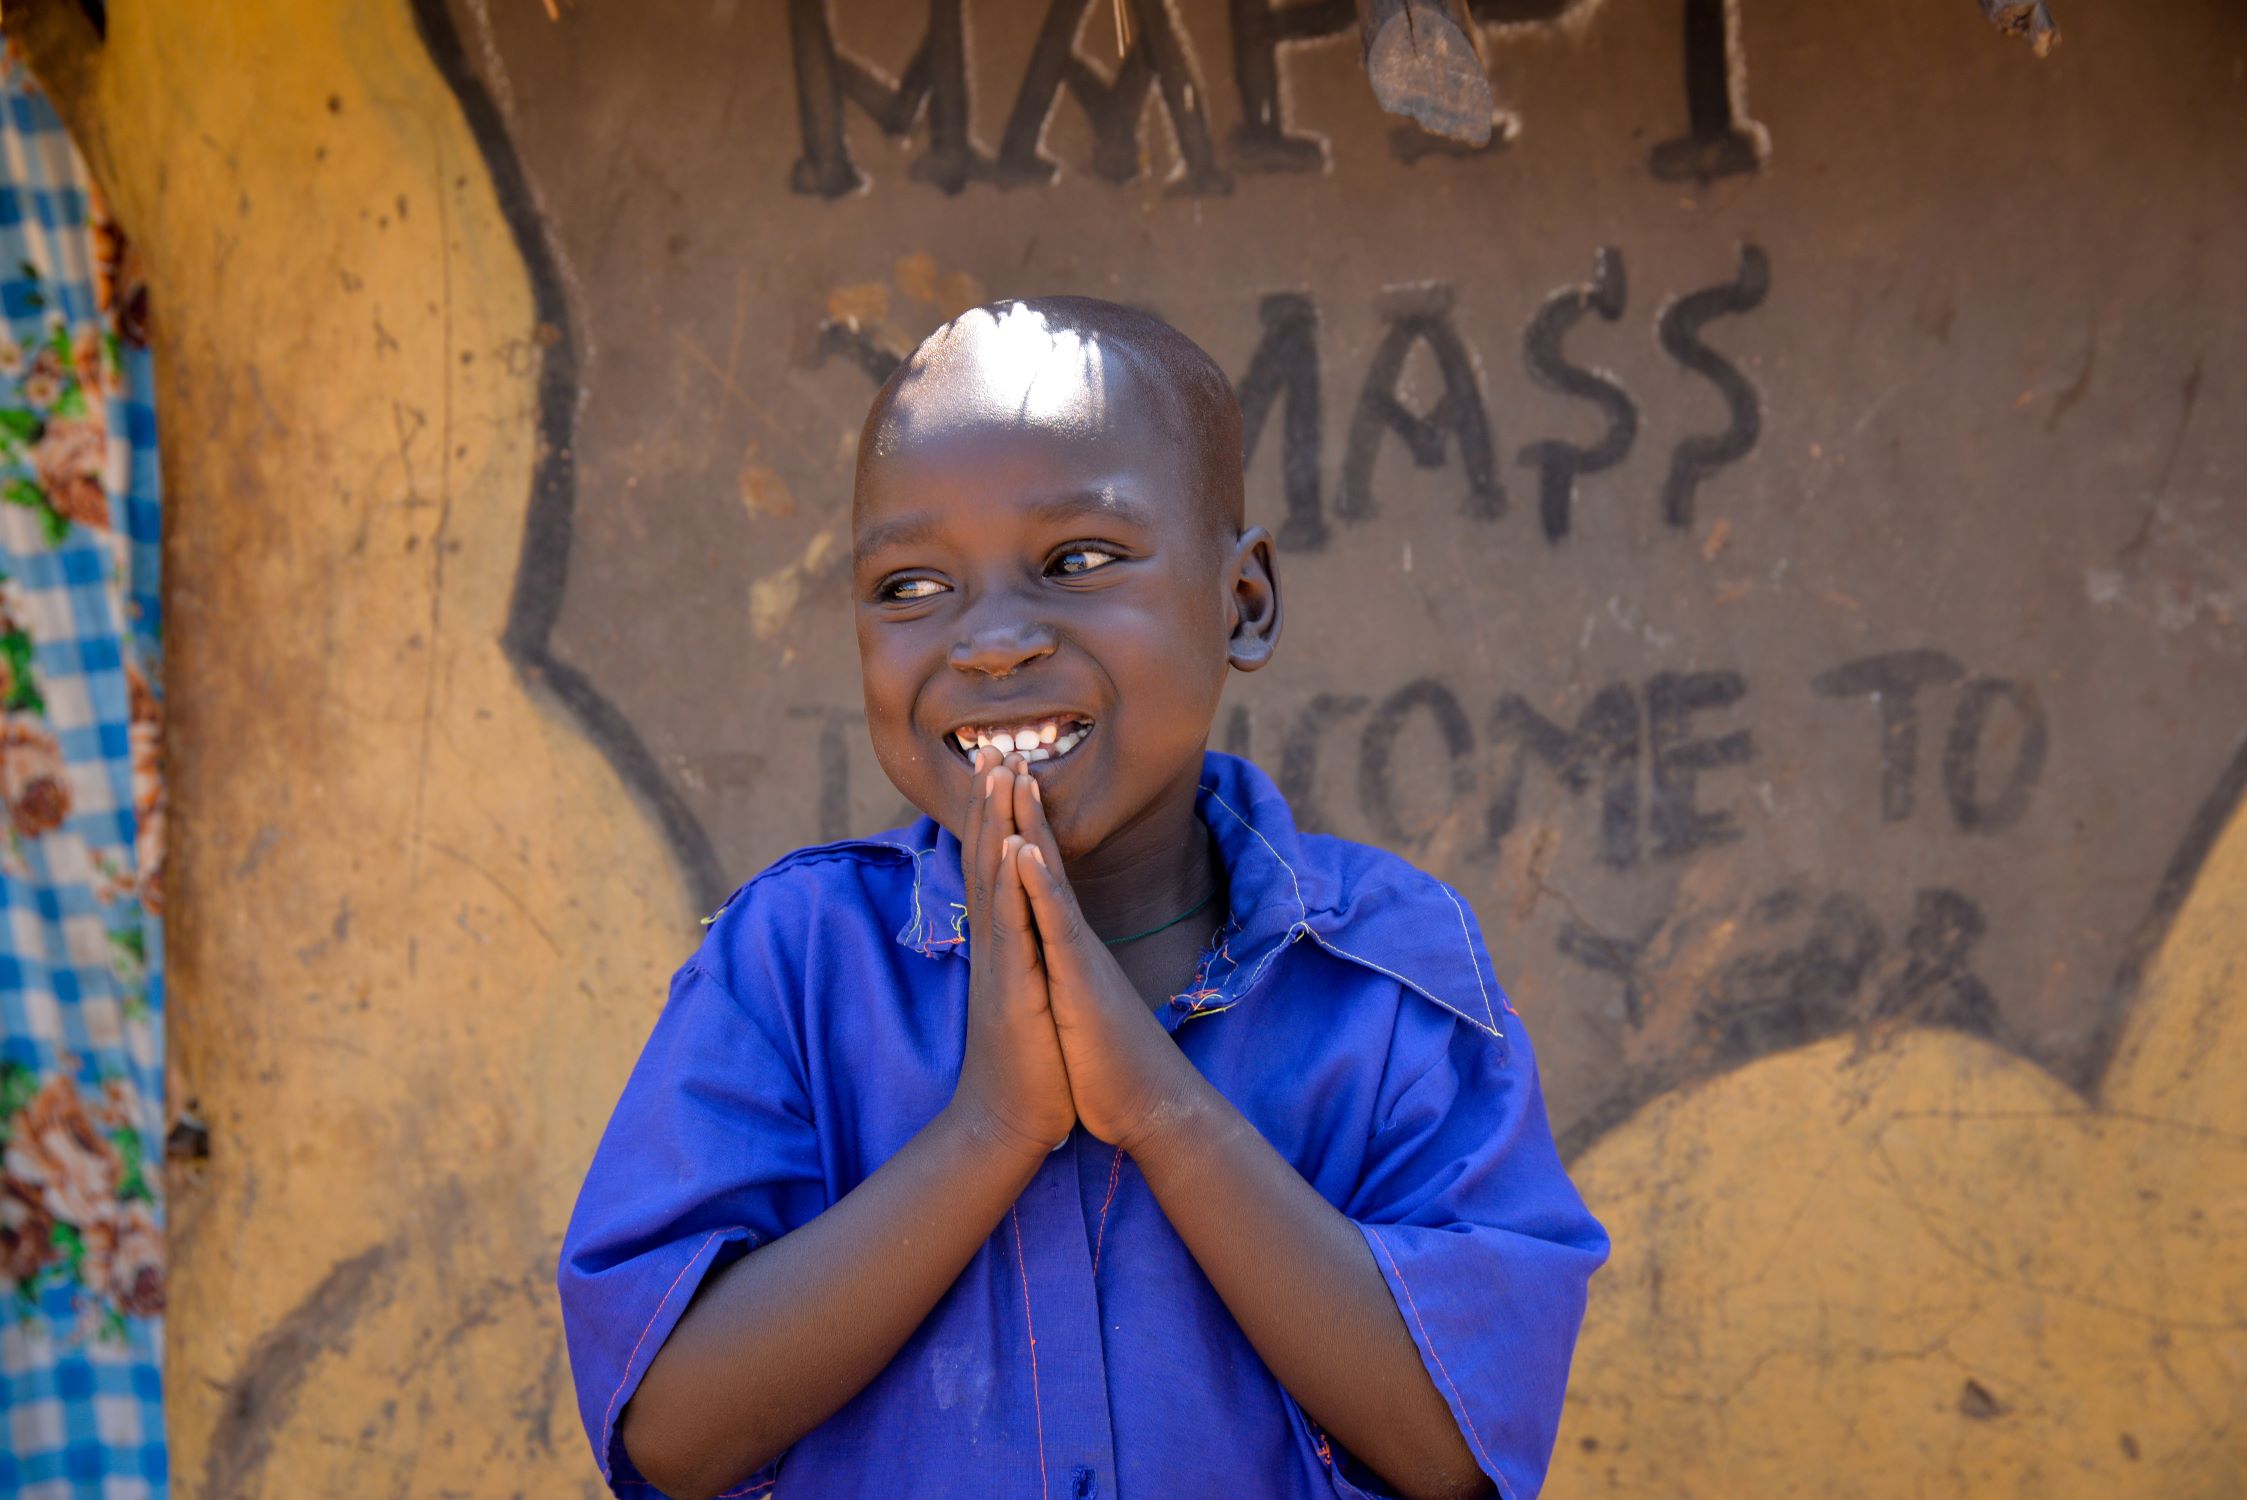 A boy in Uganda with his hands held together in prayer